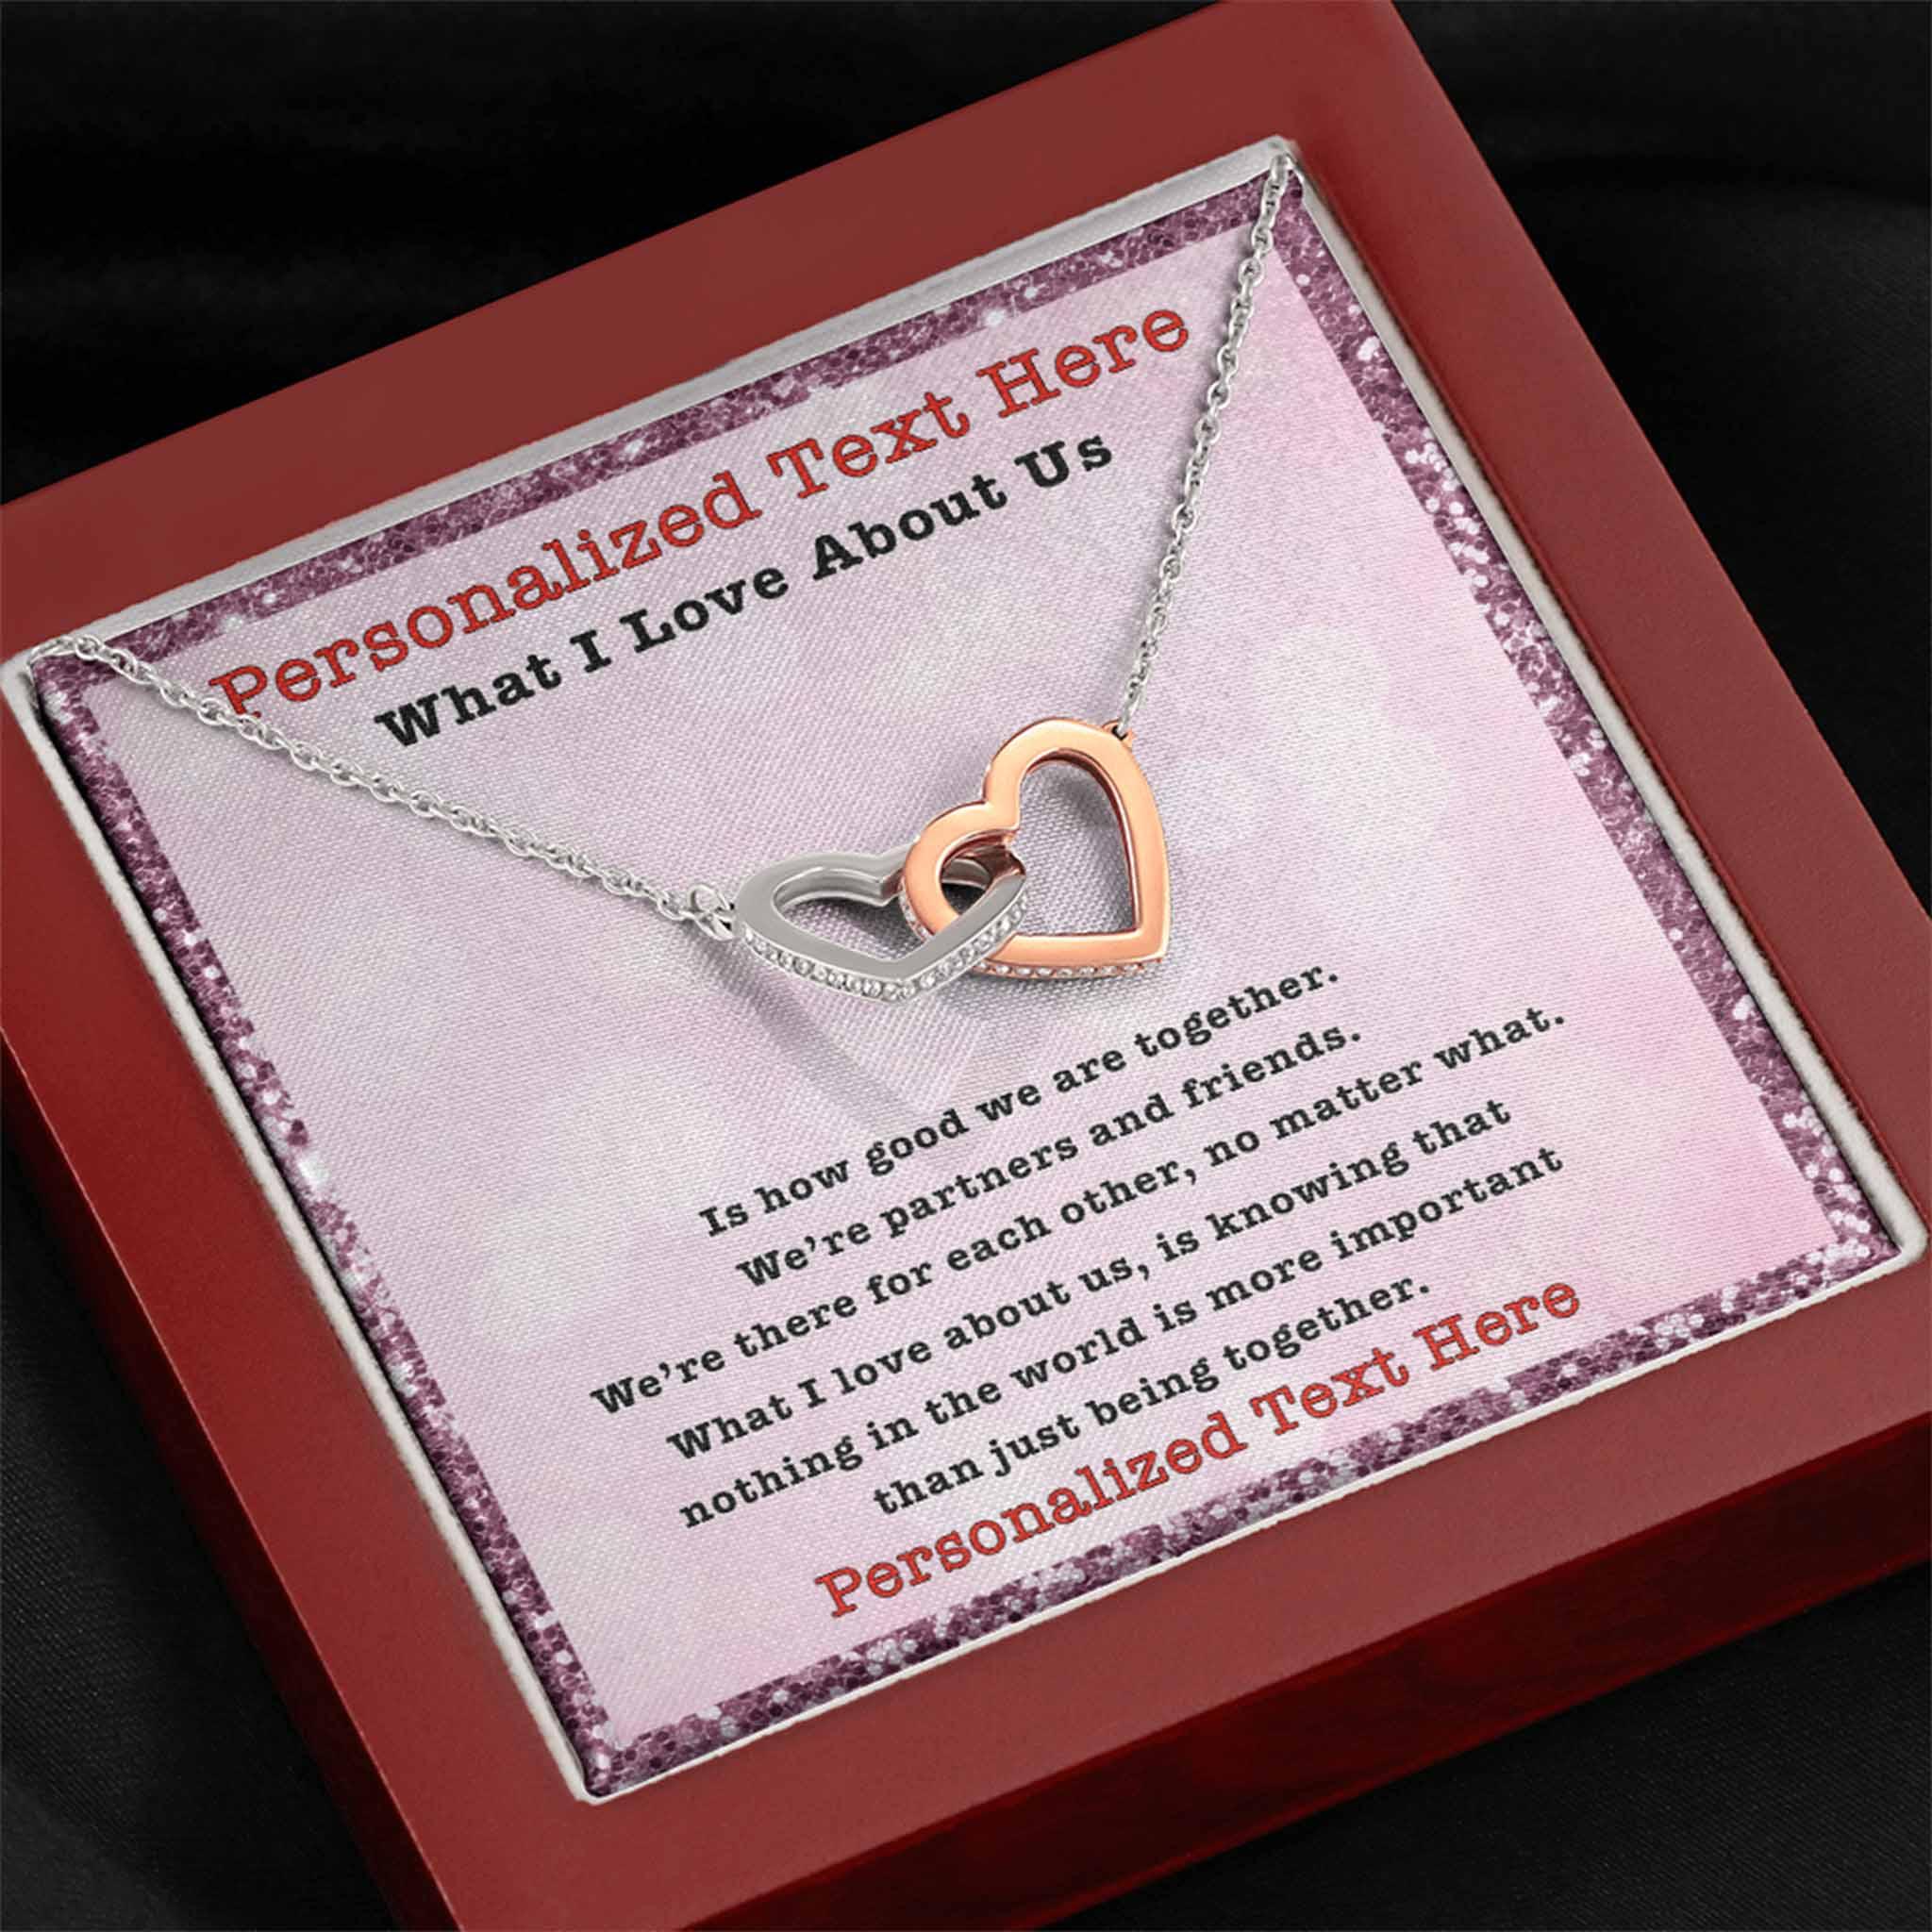 Interlocking Hearts Necklace What I Love About Us Personalized Insert CardCustomly Gifts